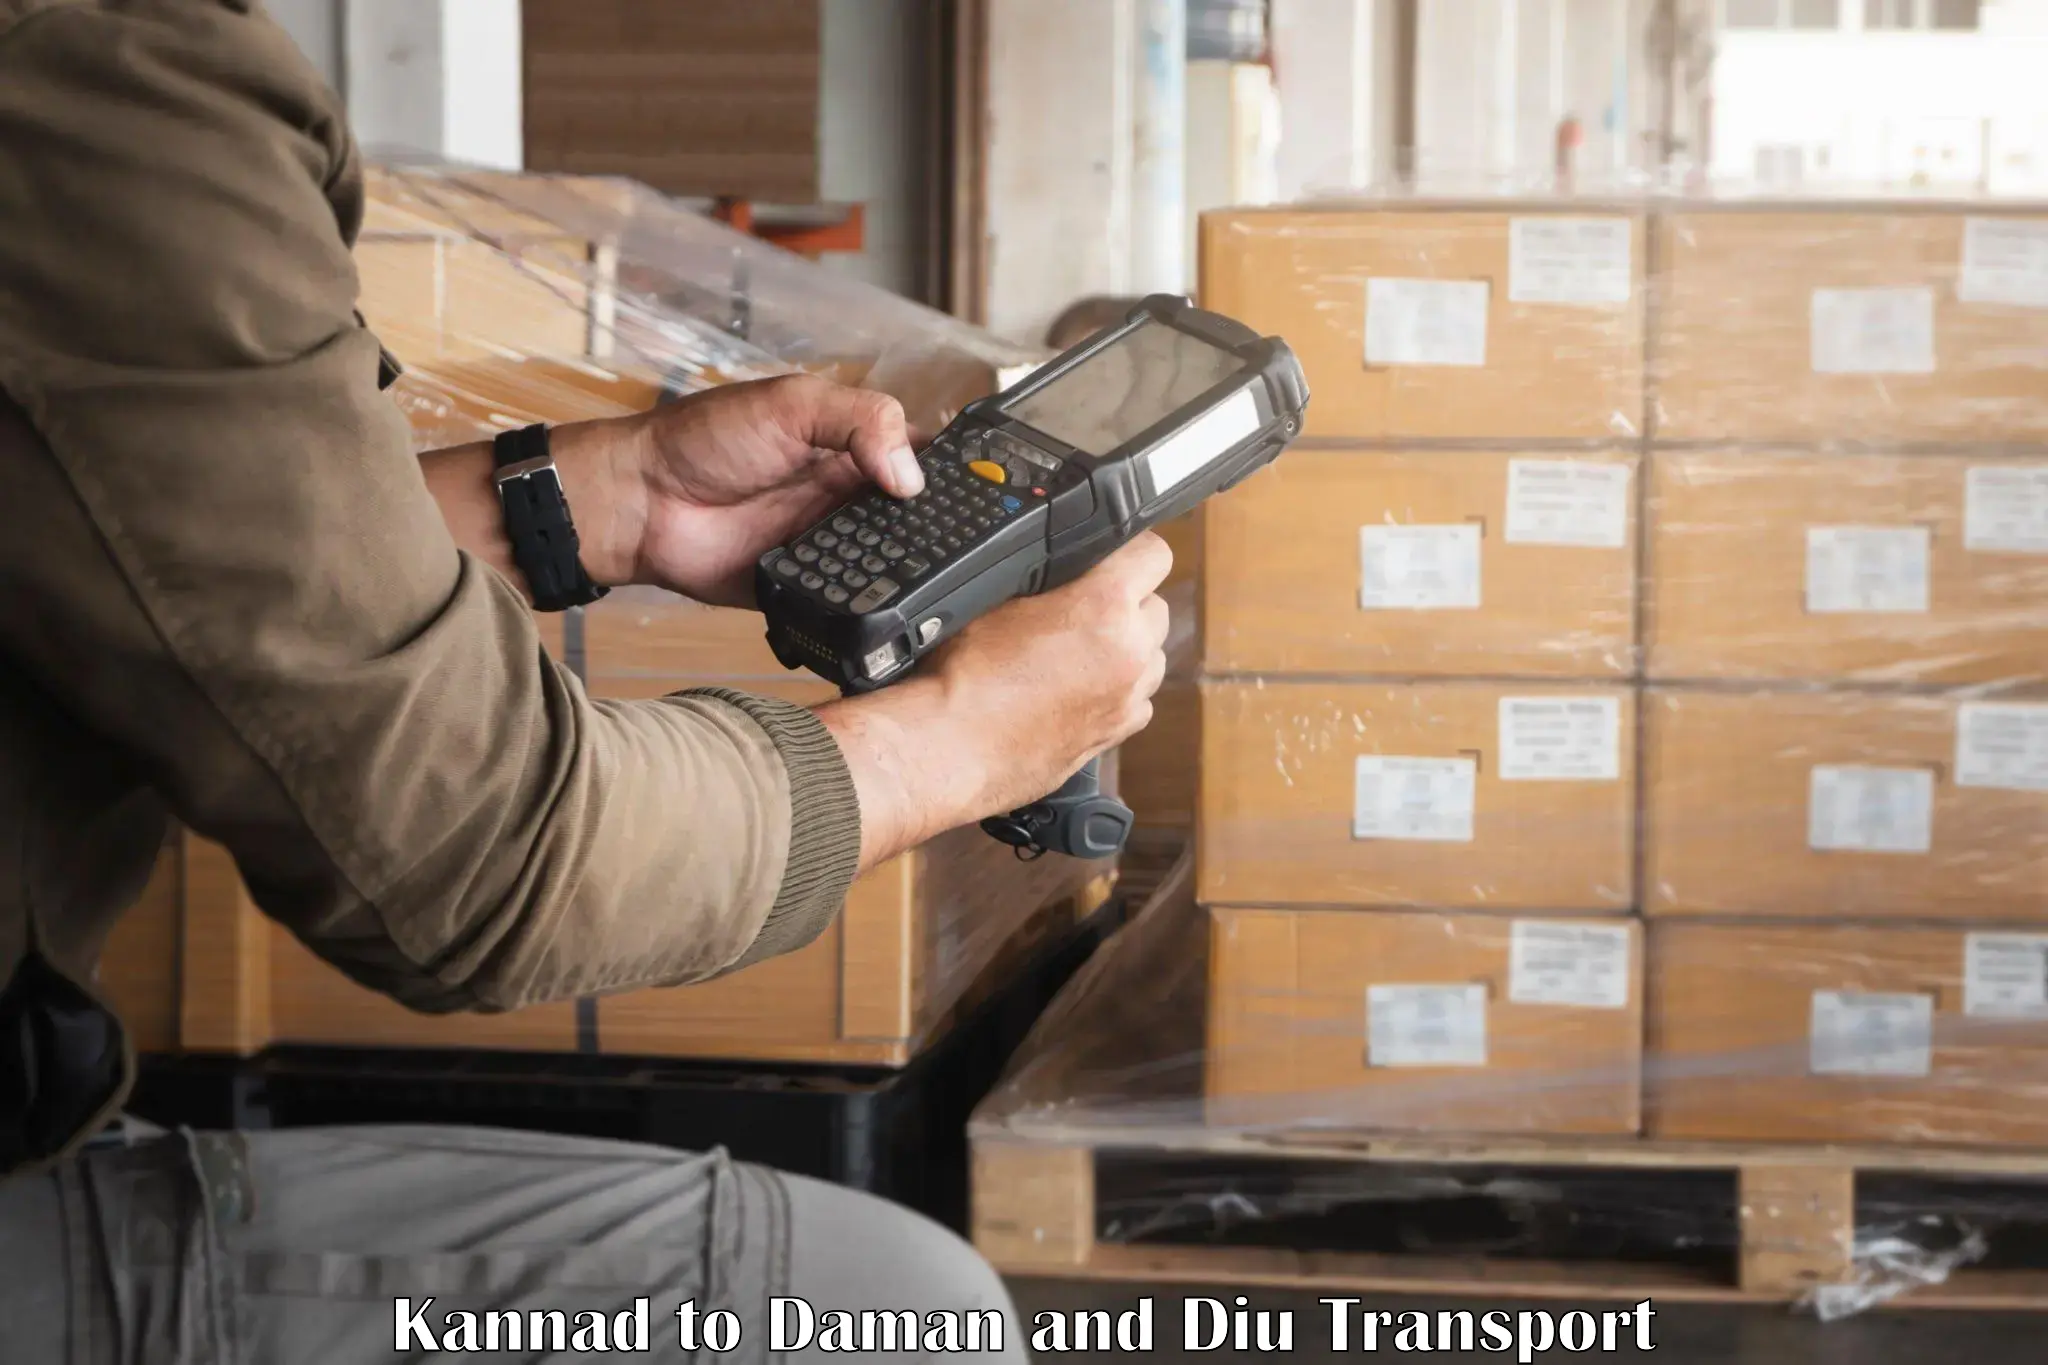 Parcel transport services Kannad to Daman and Diu